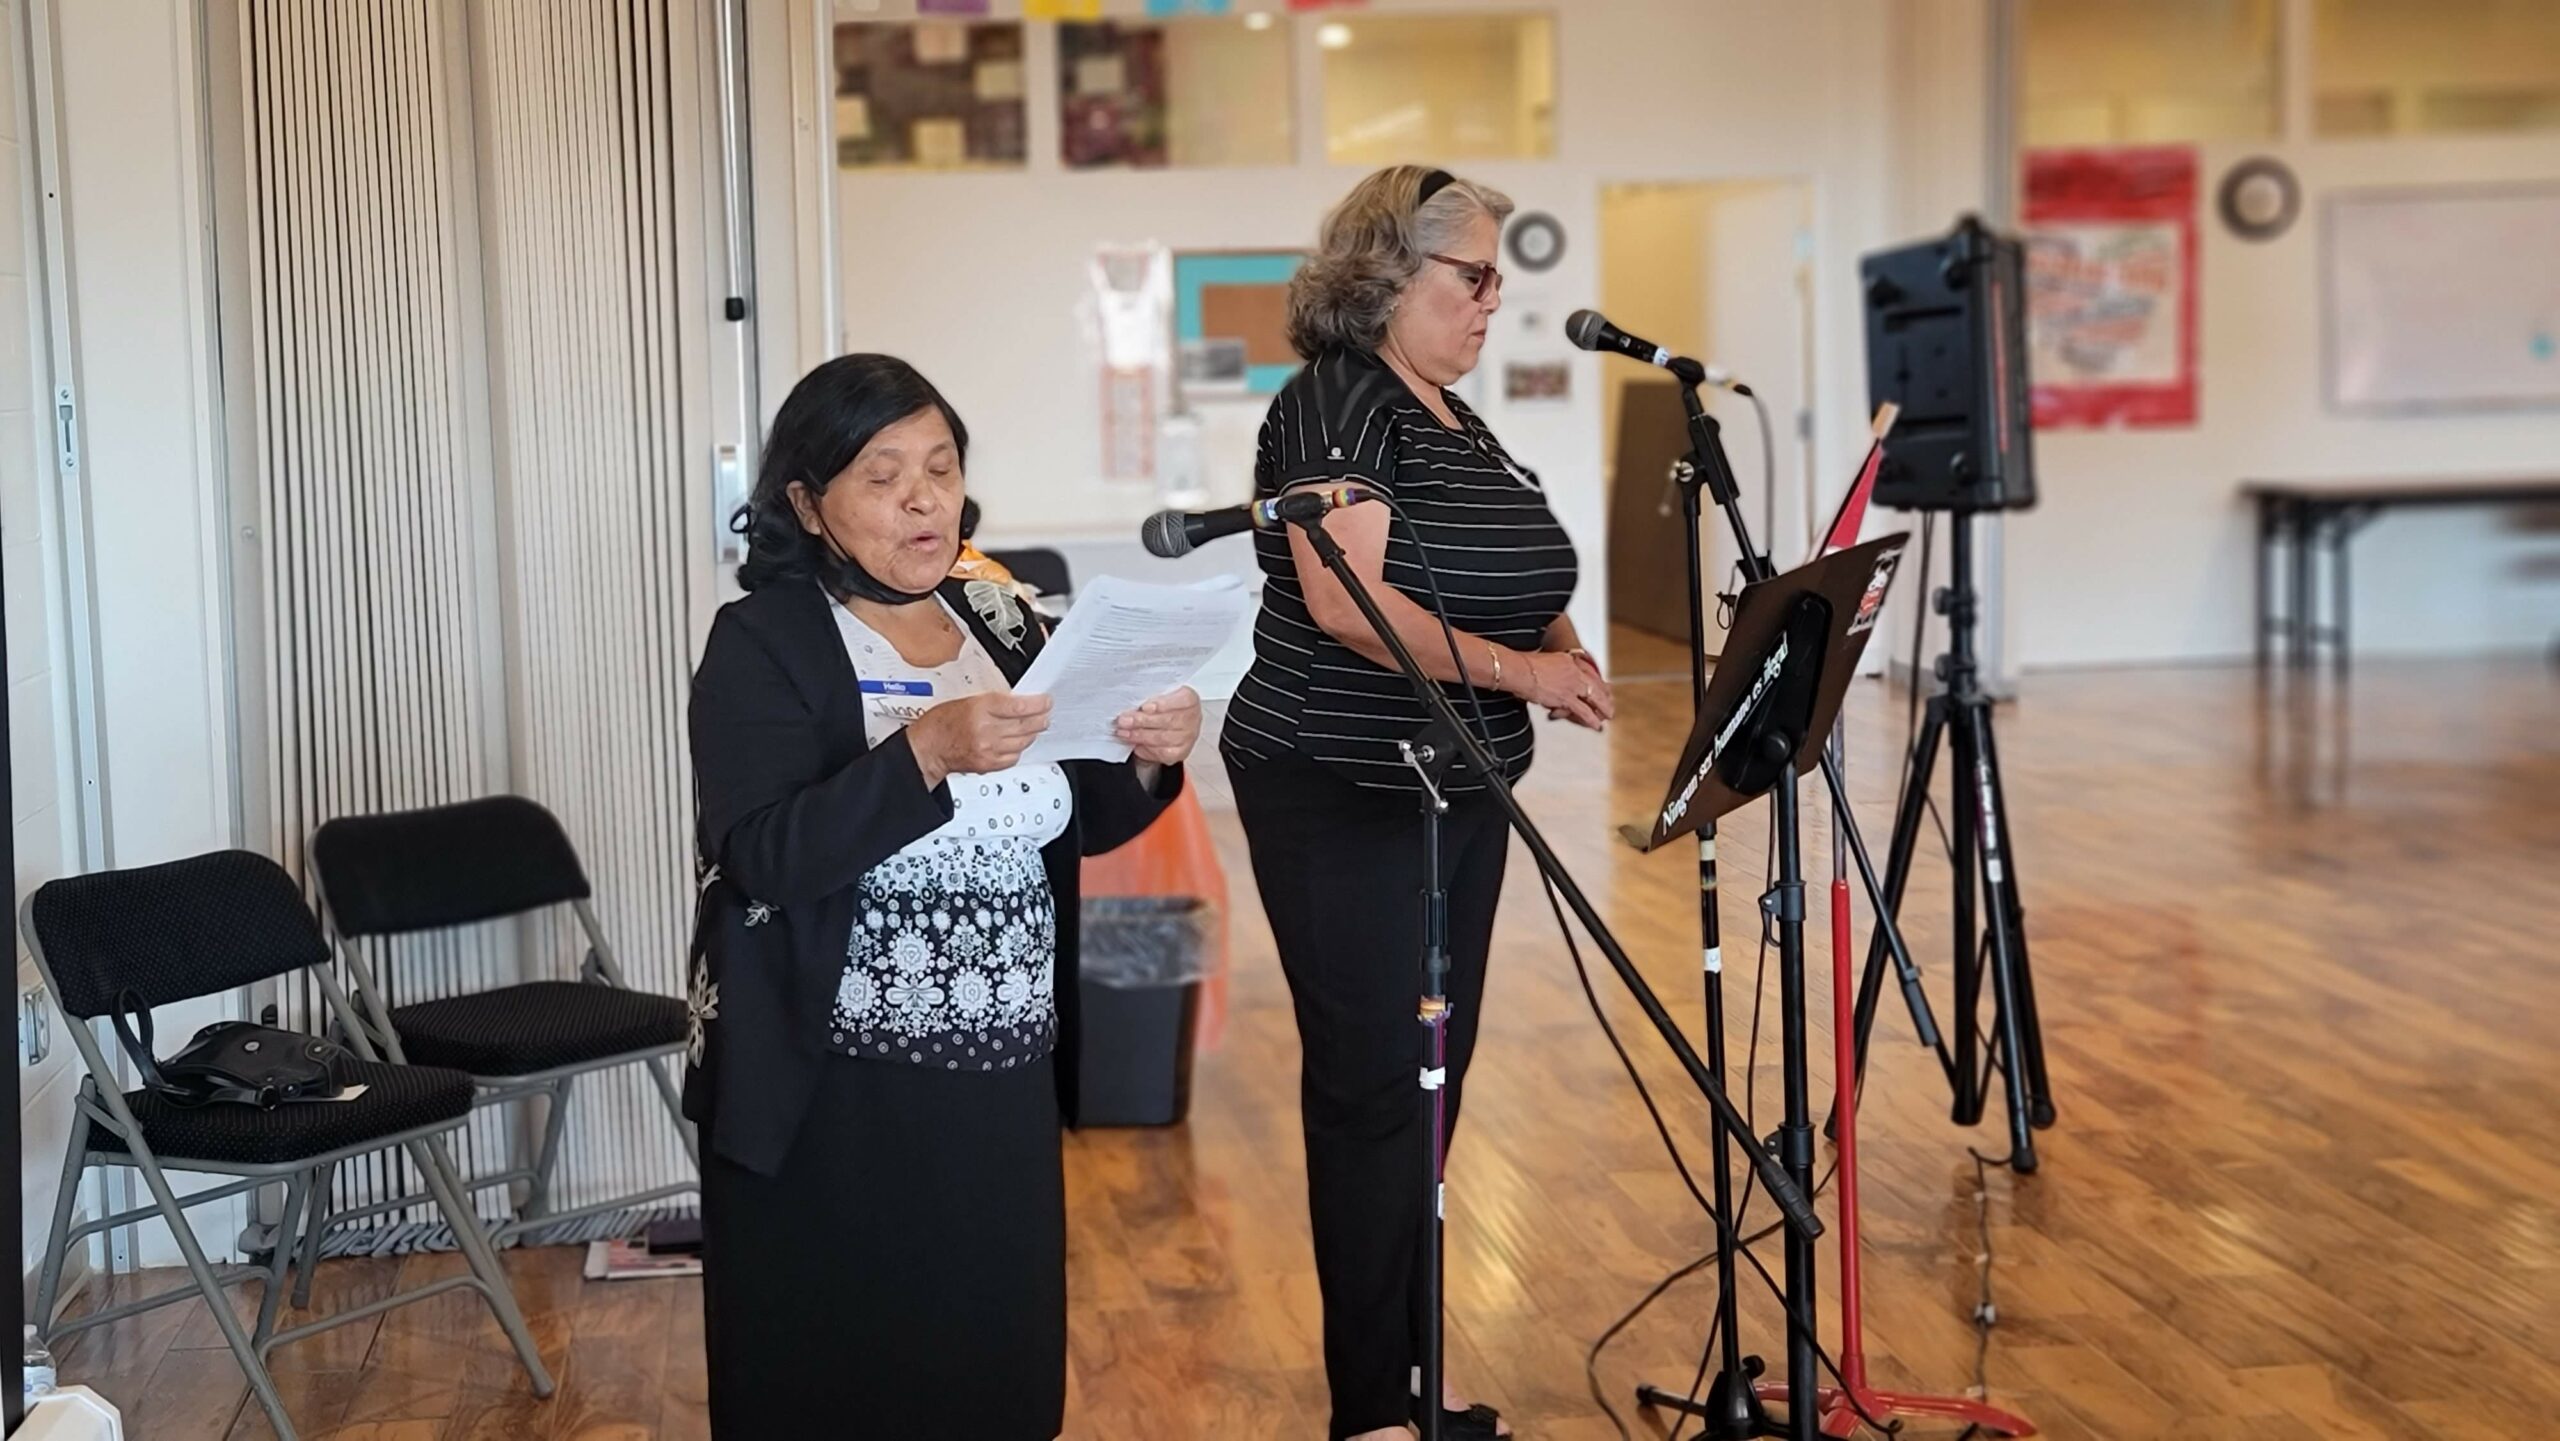 Juanita Santos and Maria Cristina Amezola were two of our Masters of Ceremony. They played a vital leadership role facilitating the event, welcoming guests, and keeping things rolling. 